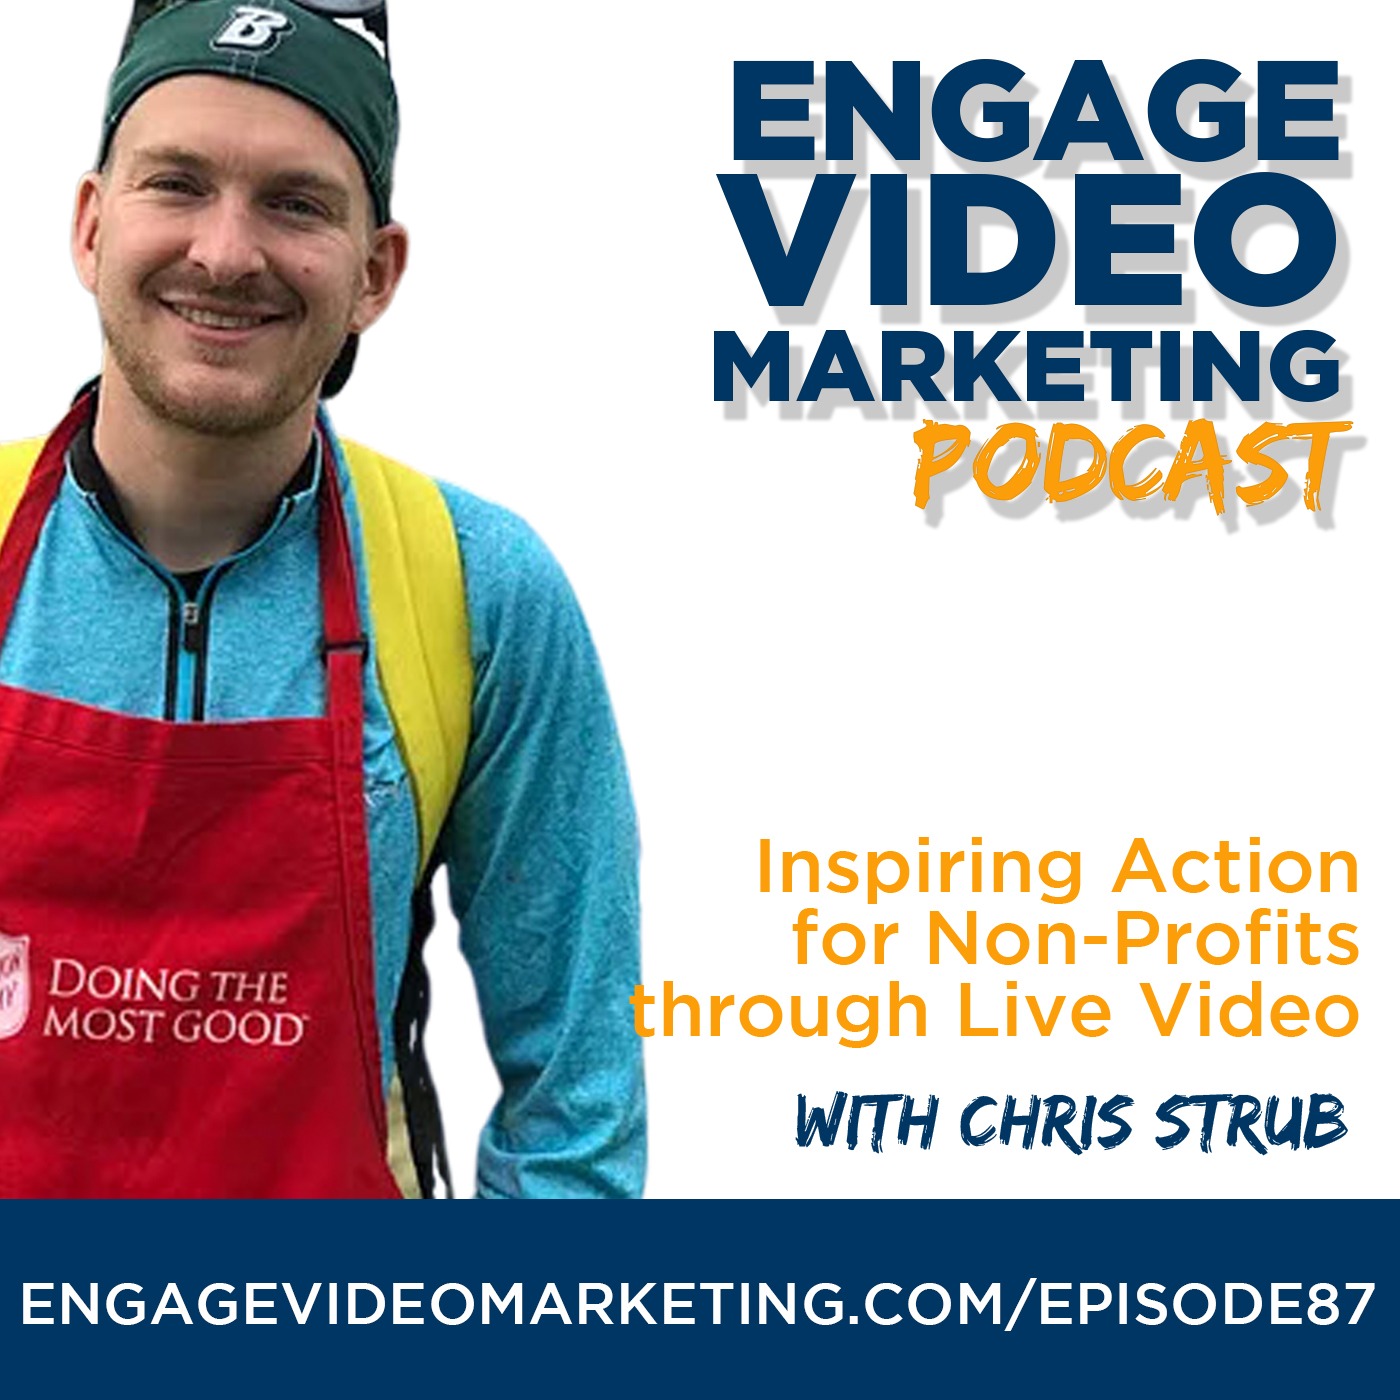 Inspiring Action for Non-Profits through Live Video with Chris Strubb